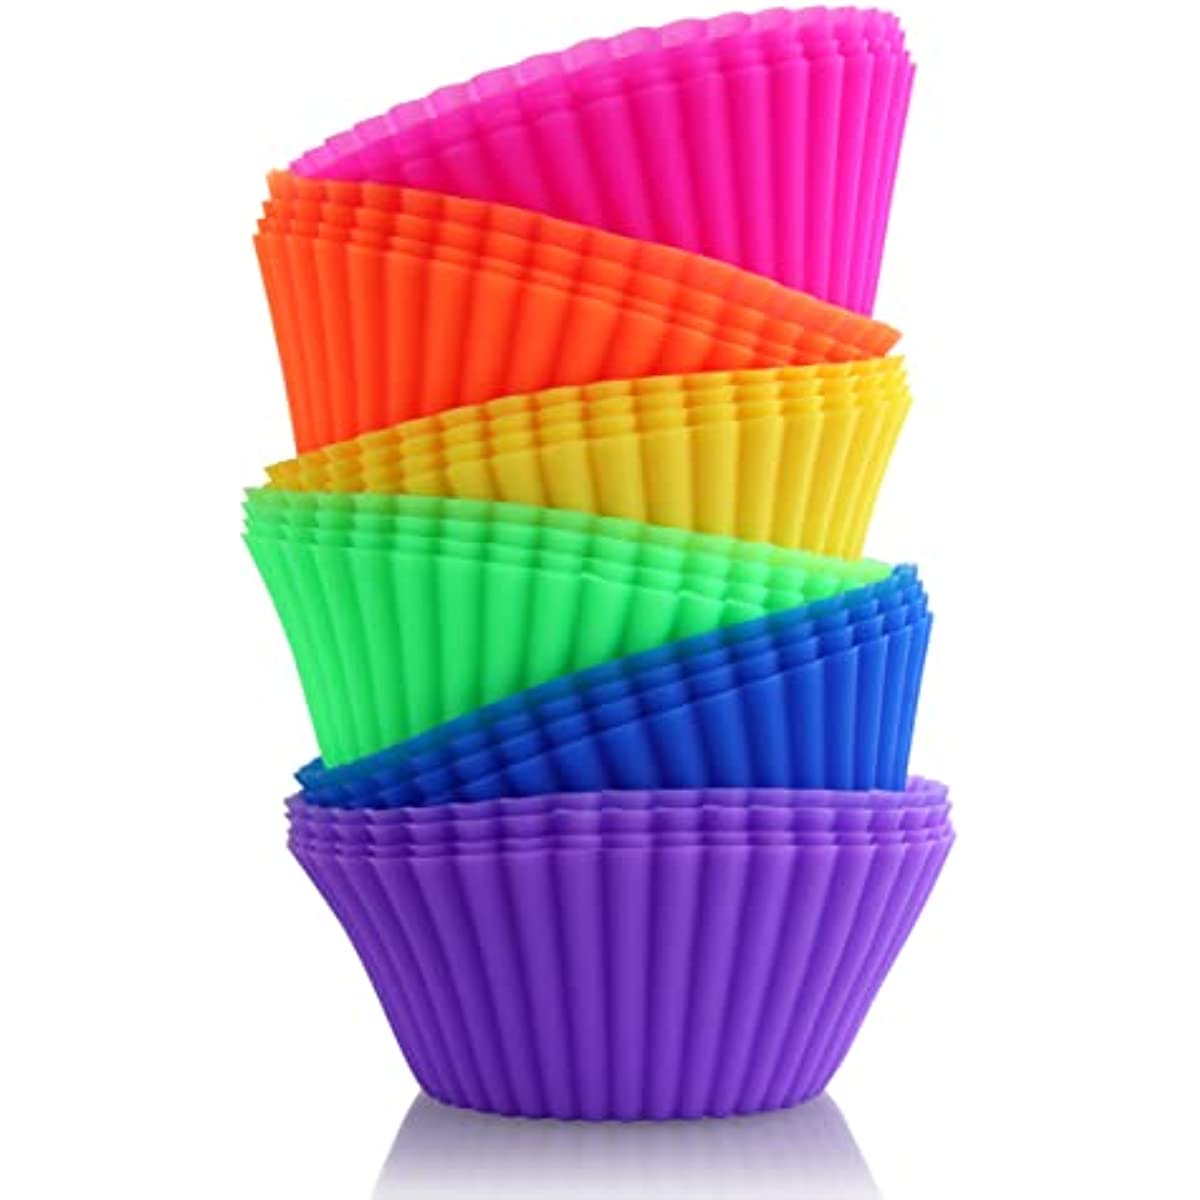 24 Pcs Silicone Cups Baking Molds, Silicone Cupcake Baking Cups Reusable  Non-stick Muffin Liners for Baking, 4 Shapes (A)